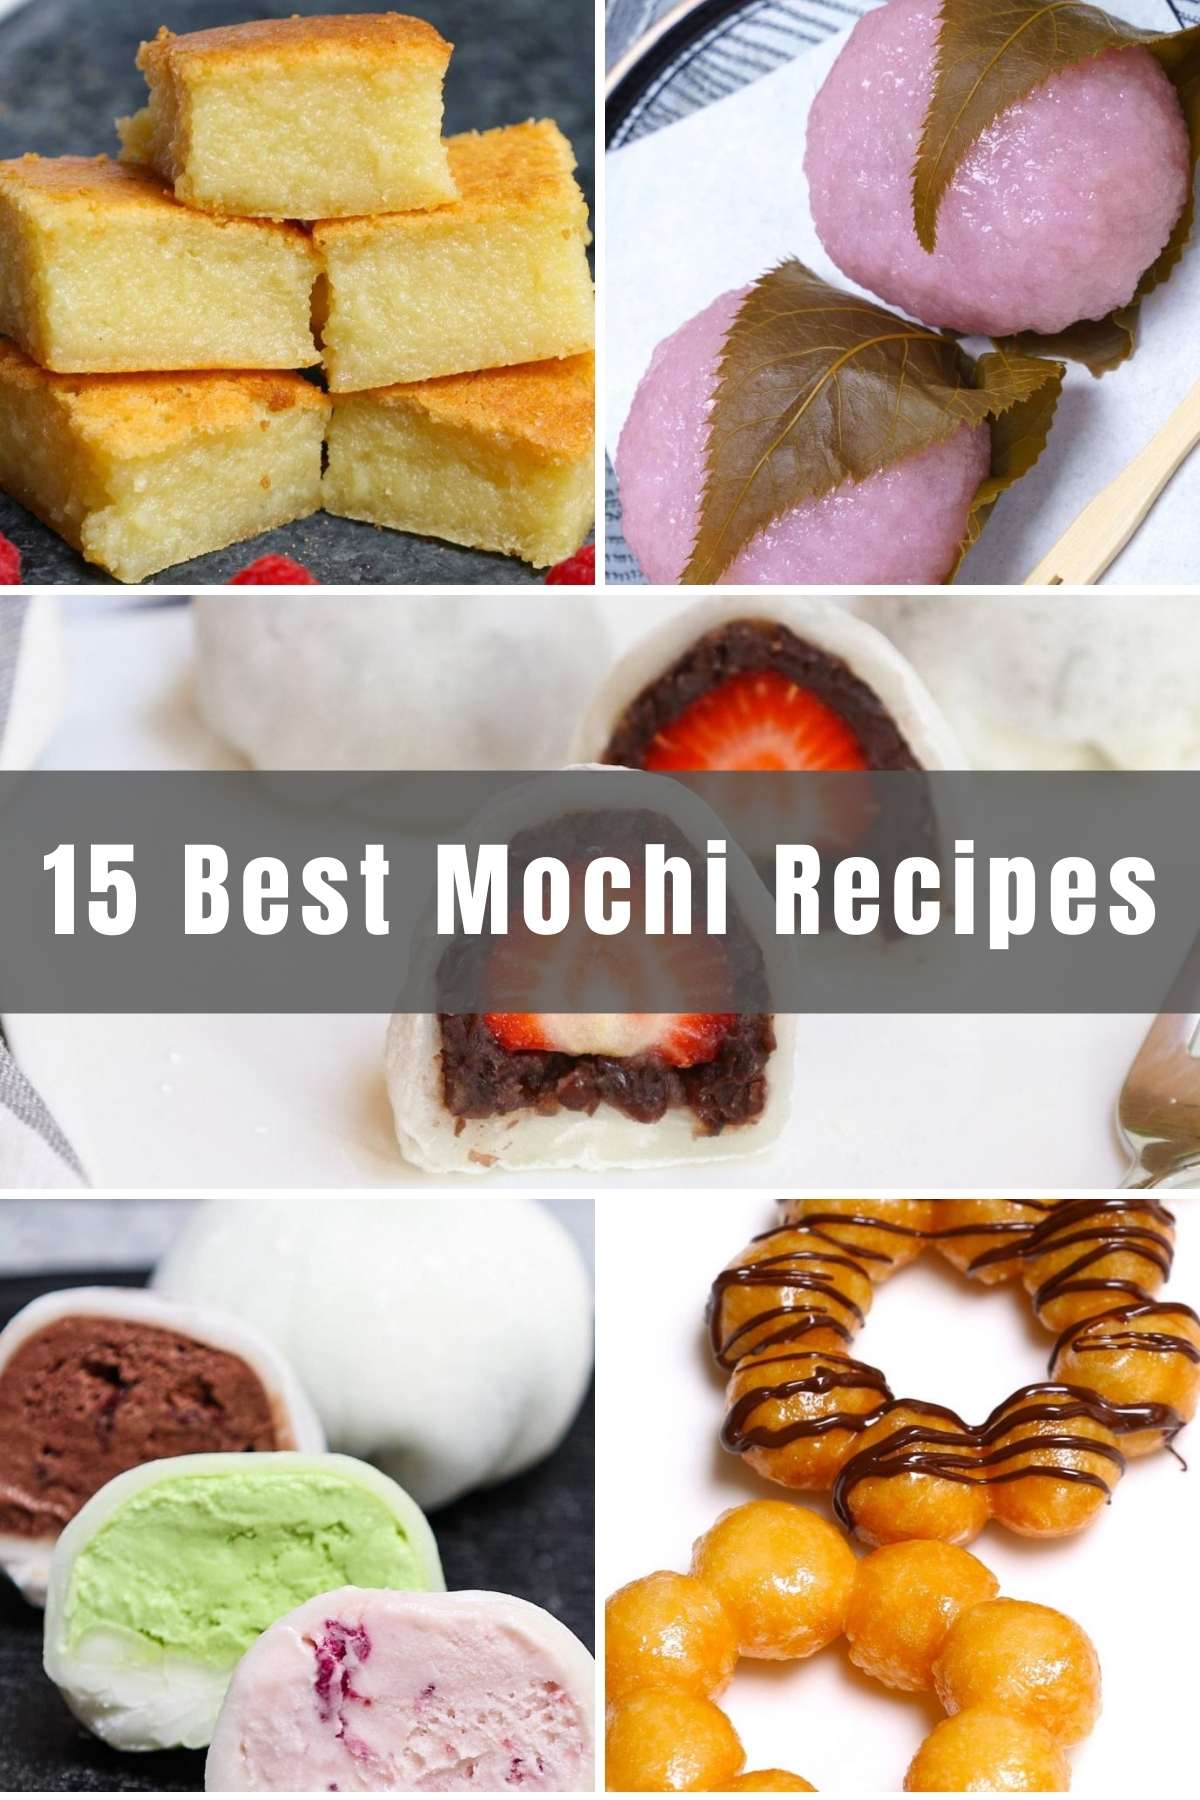 Mochi!! This popular Japanese dessert has a soft, tender, and chewy mochi rice cake enclosing a creamy, sweet filling. In this post, you’ll learn everything about mochi! With some simple tips, you can even make this delicious snack at your own home and customize it with your favorite fillings.